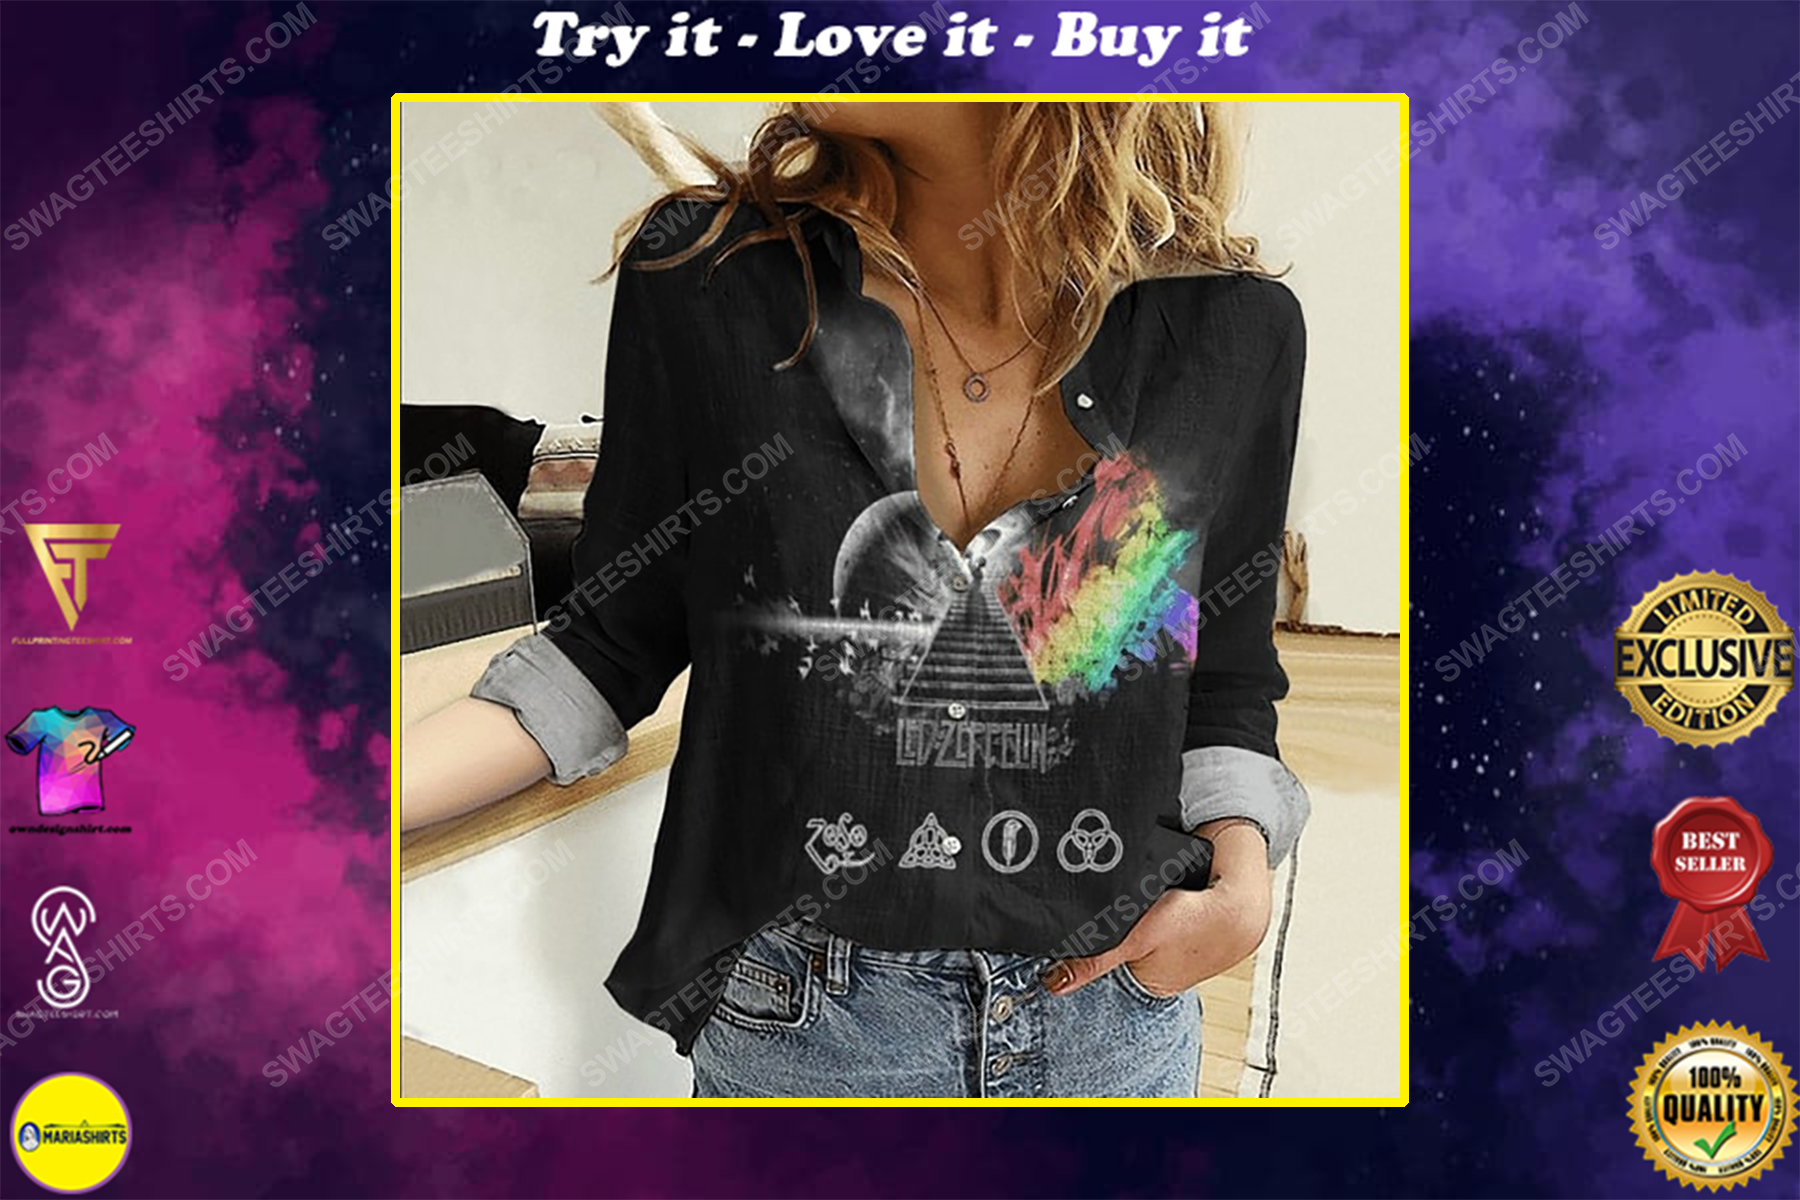 Led zeppelin retro fully printed poly cotton casual shirt